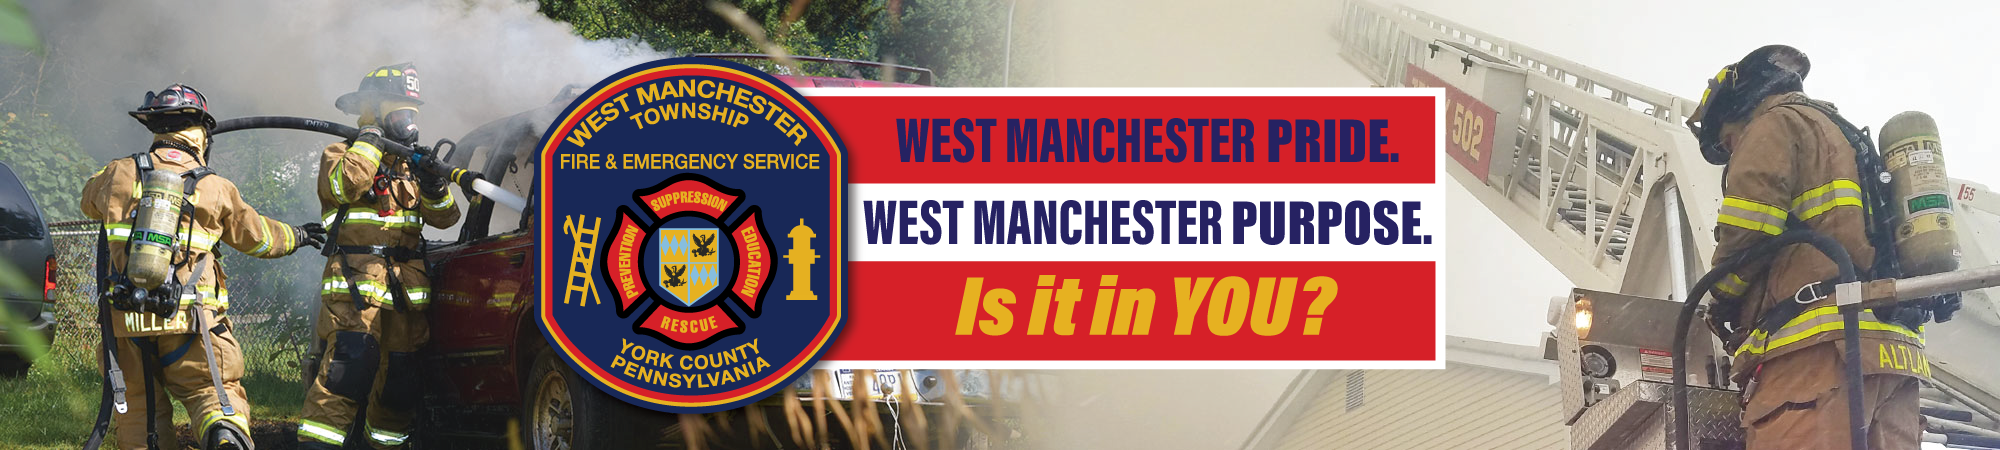 Join West Manchester Firefighters